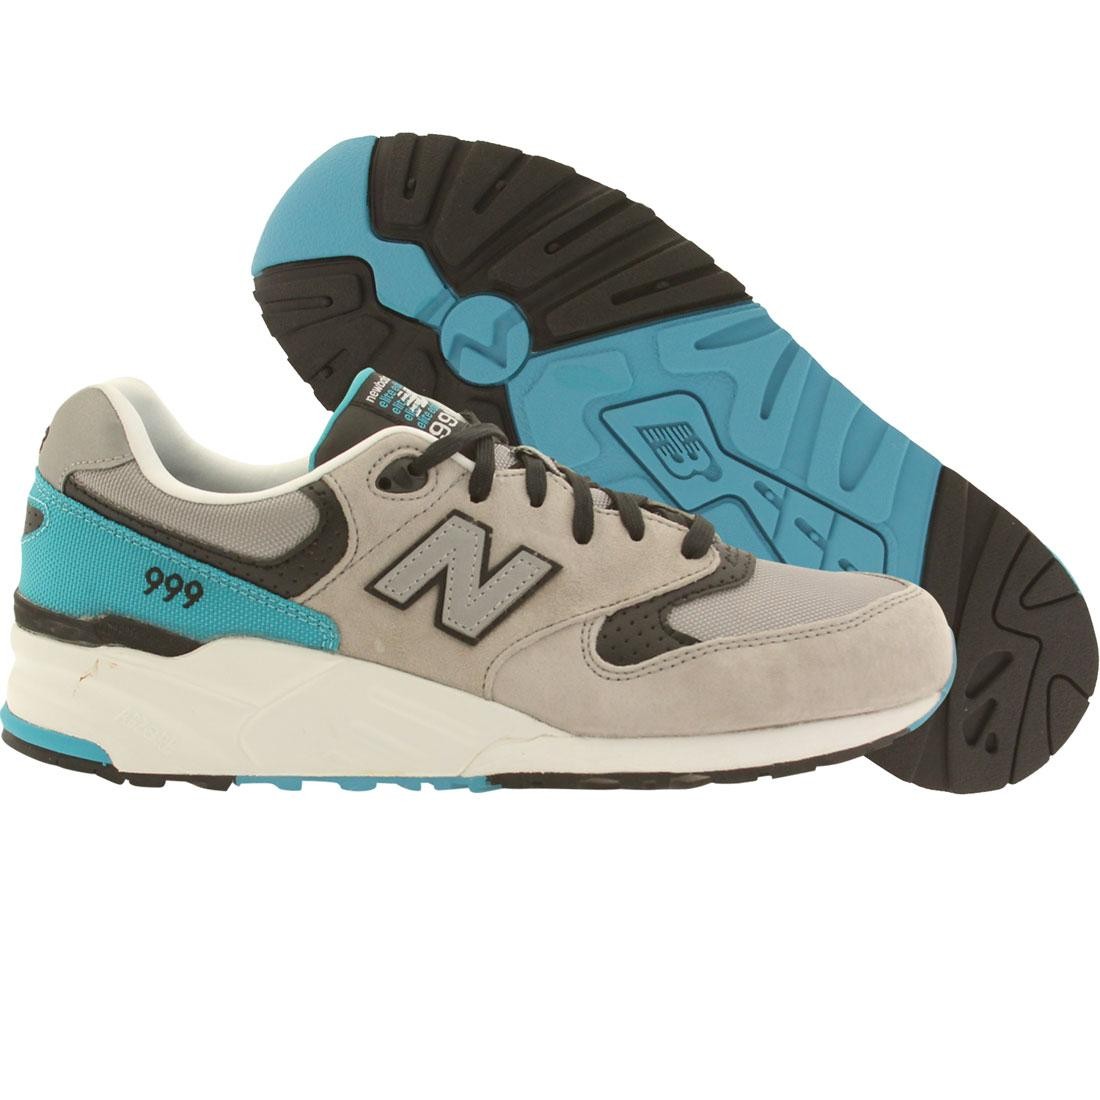 Beleefd Monument commentator New Balance Men 999 Sound and Stage ML999SST gray light grey blue atoll